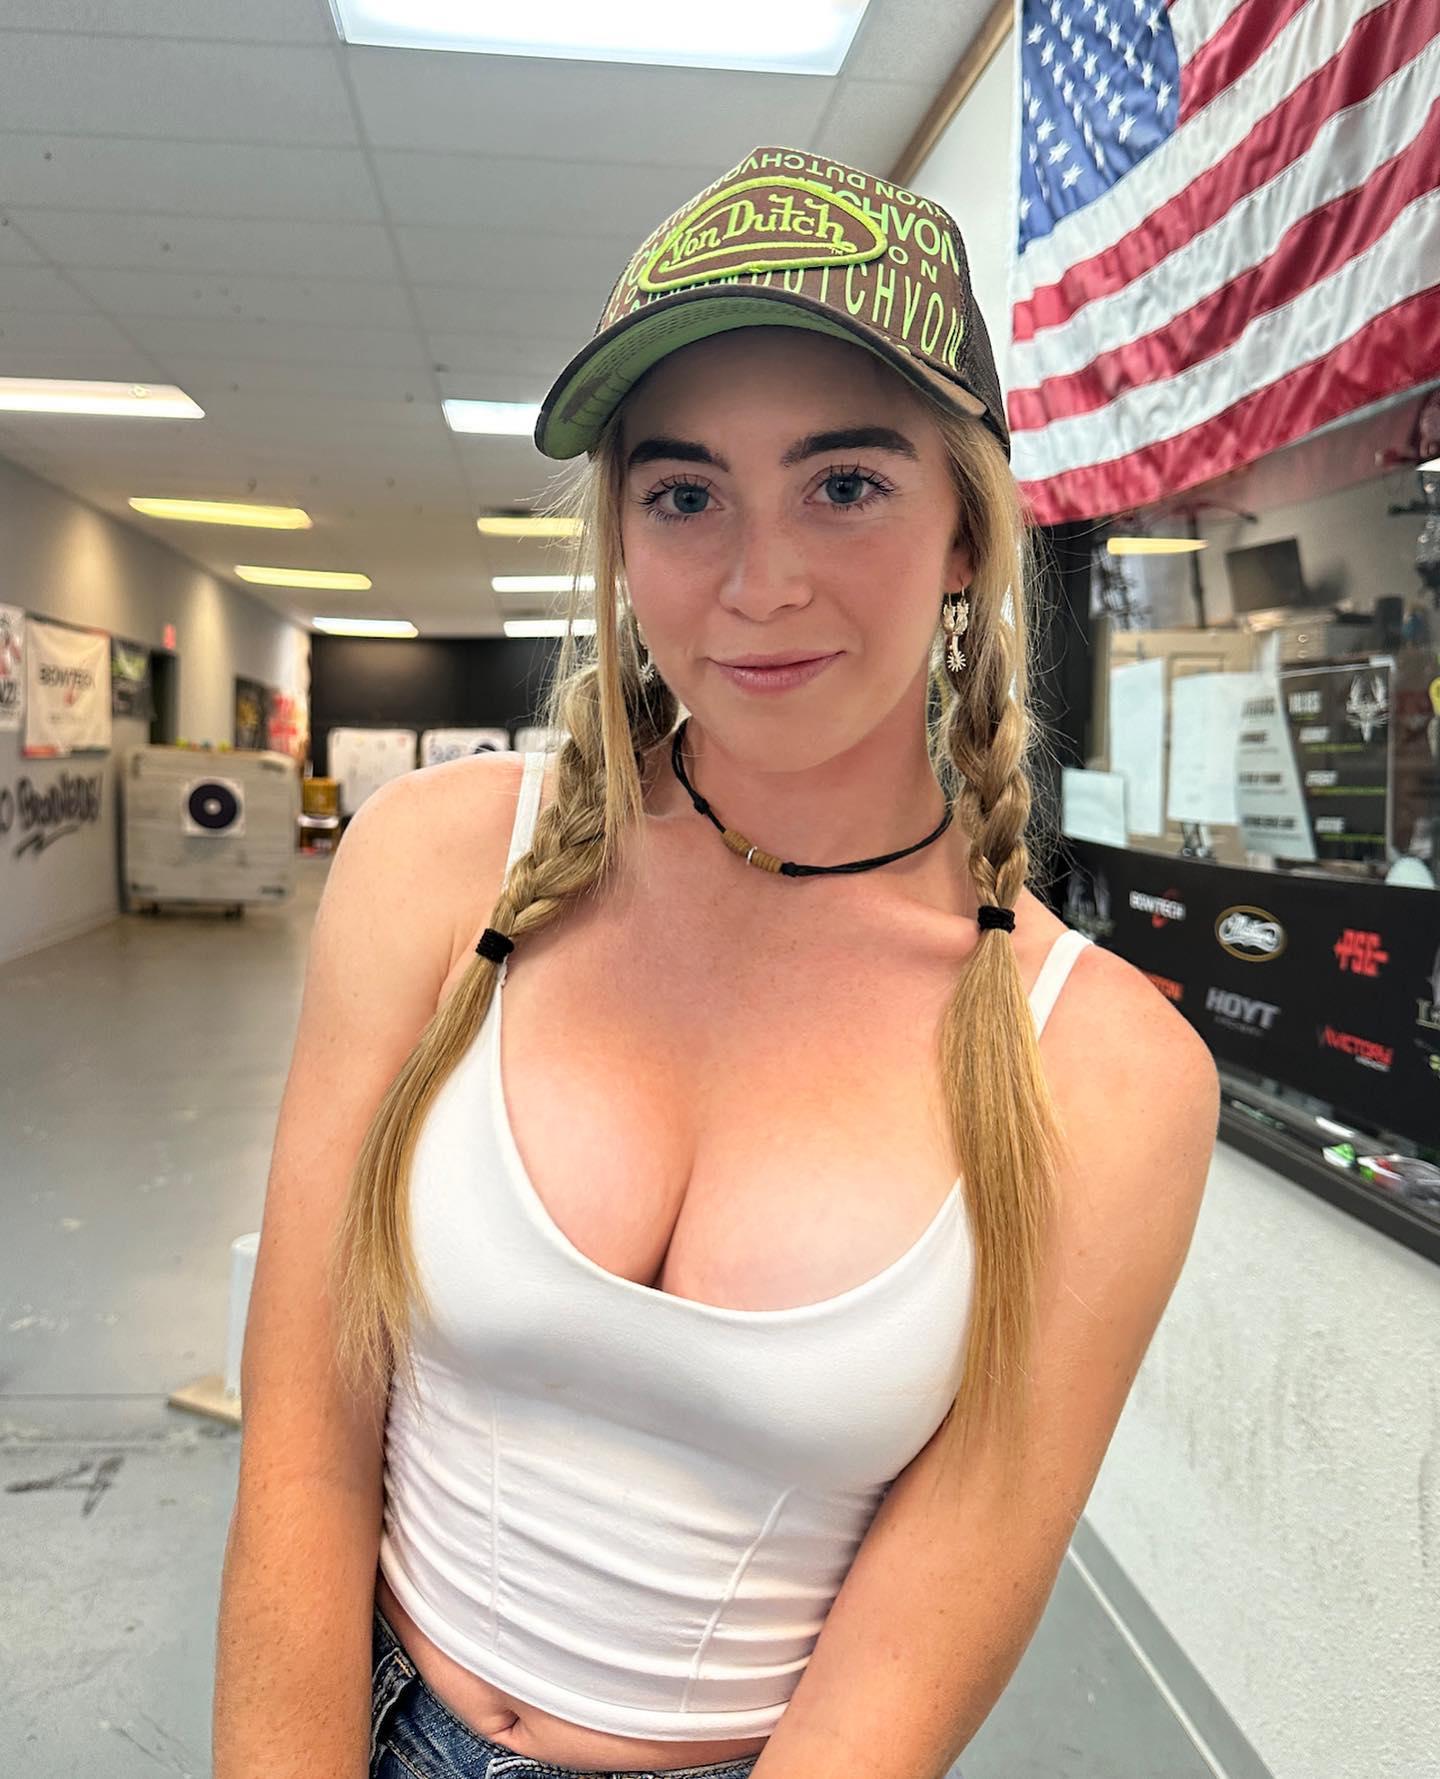 Golfer Grace Charis In Tiny Crop Top Wants To ‘Shoot My Shot’